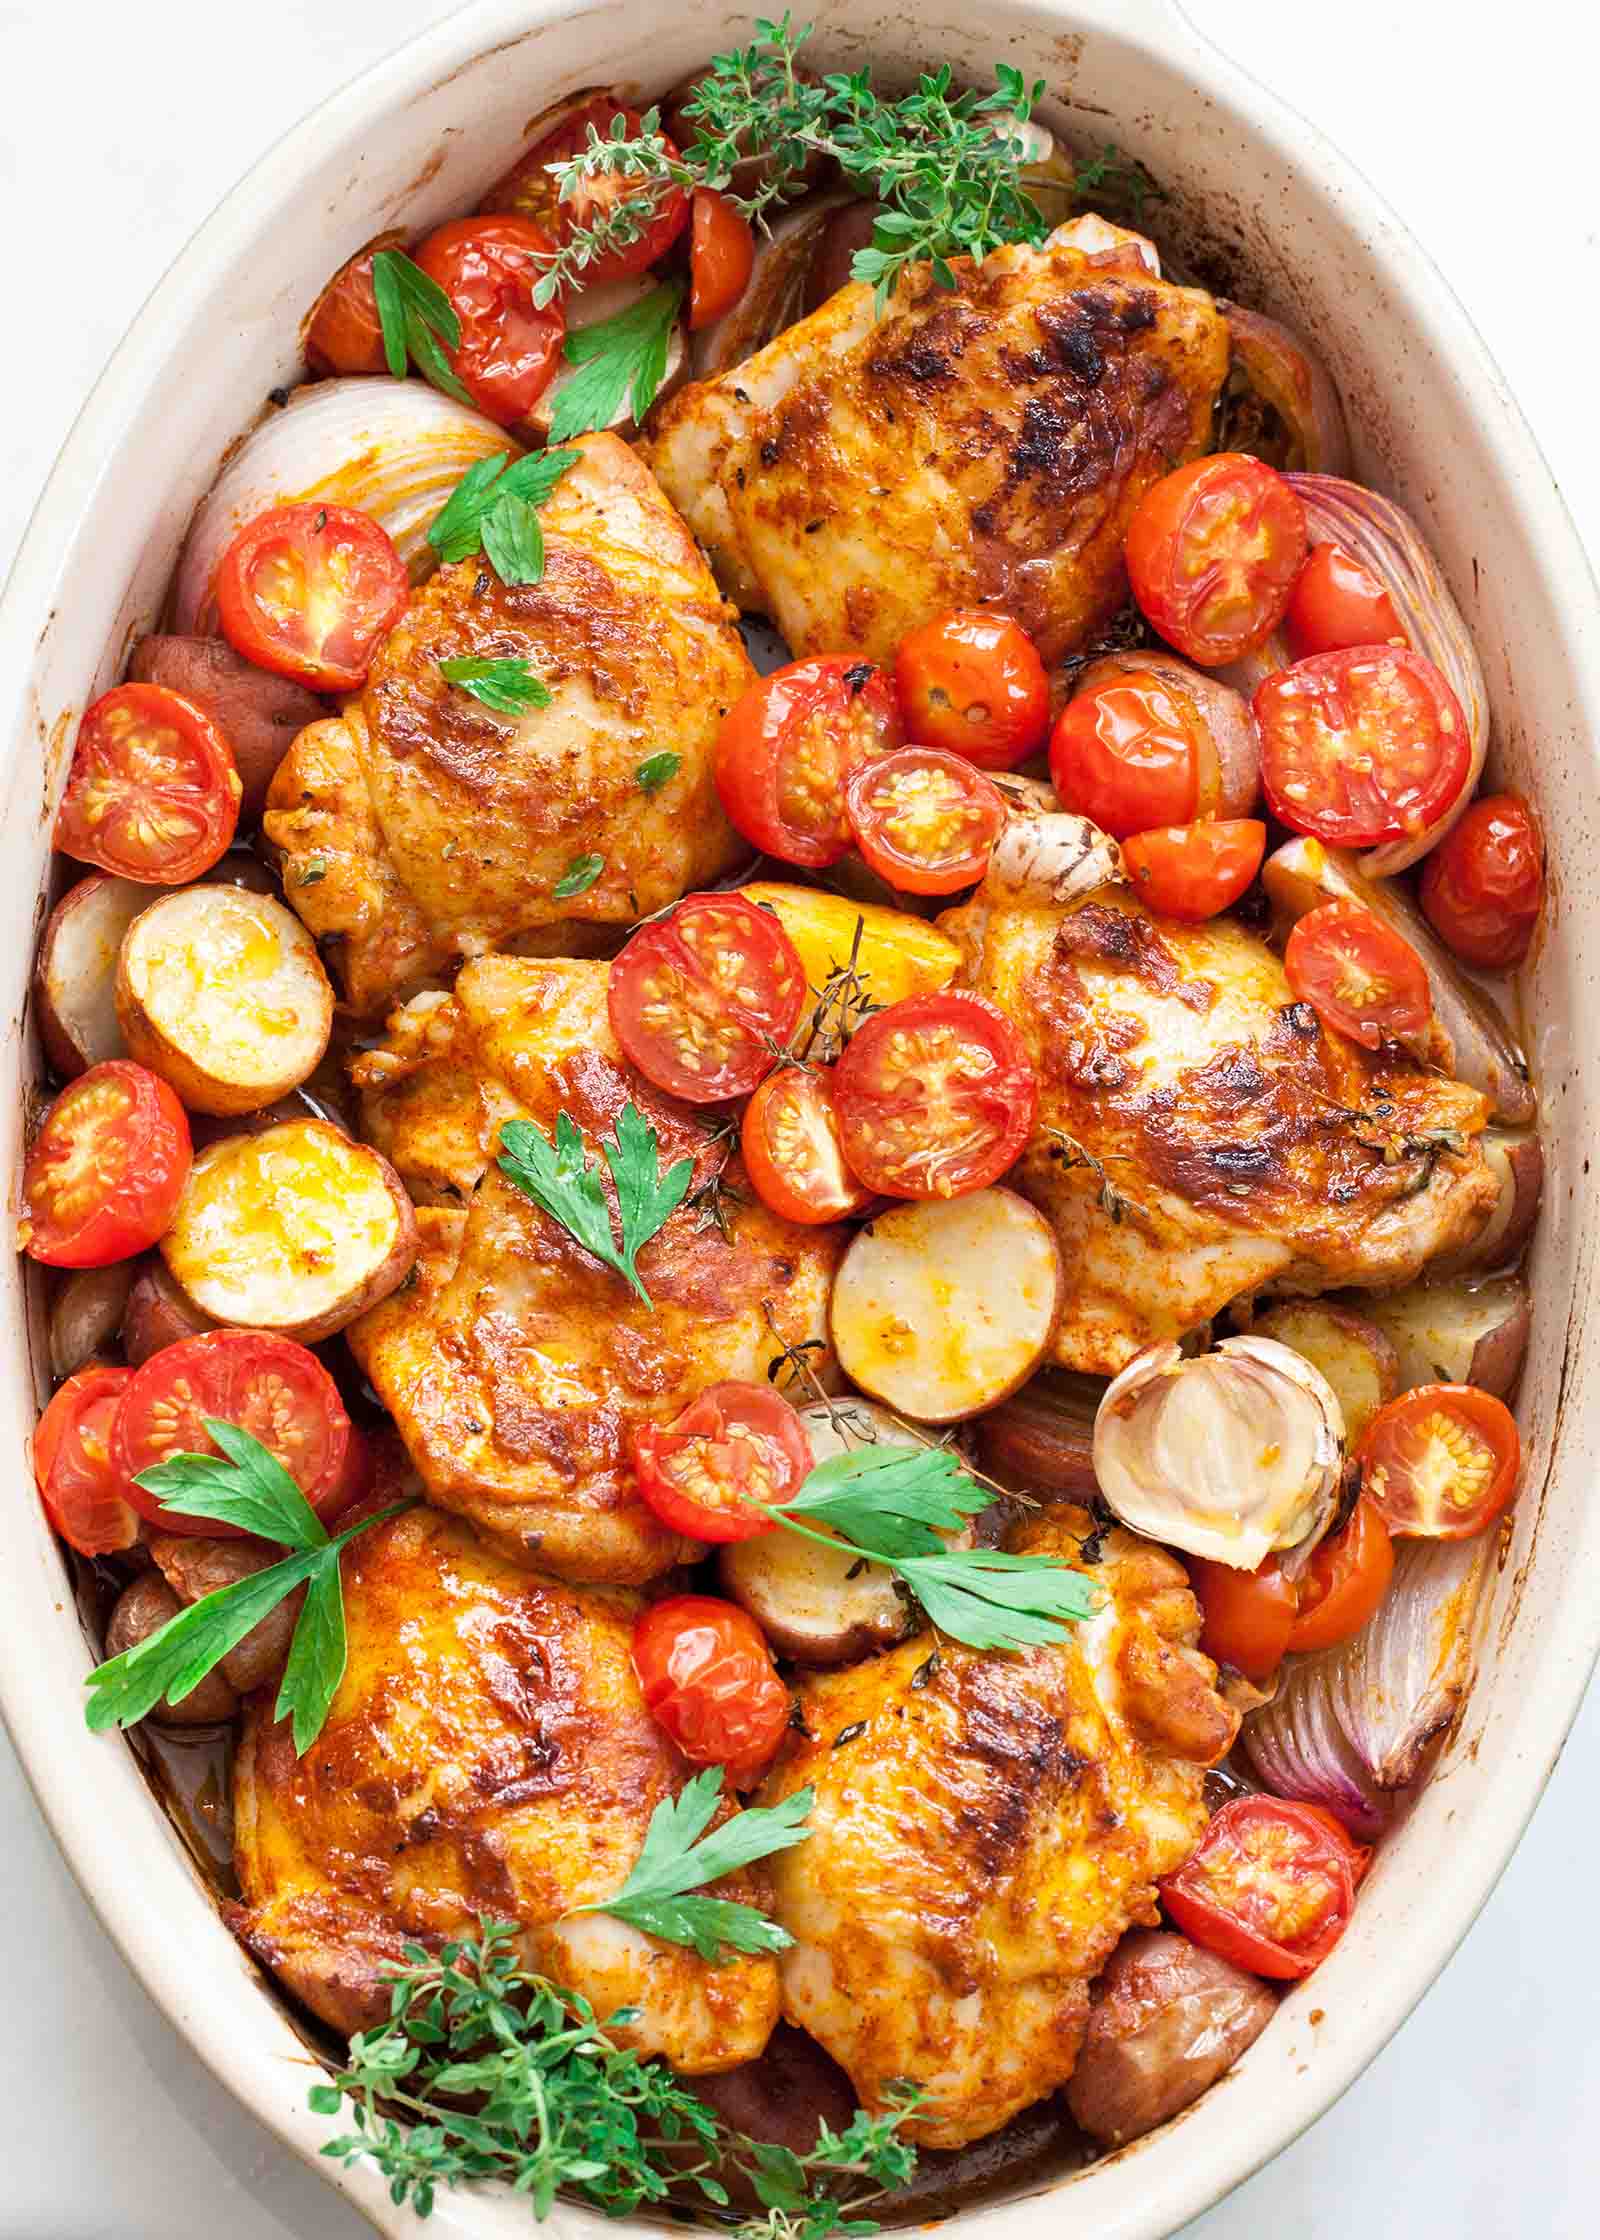 Paprika Chicken and Potatoes with Tomatoes in an oval baking dish